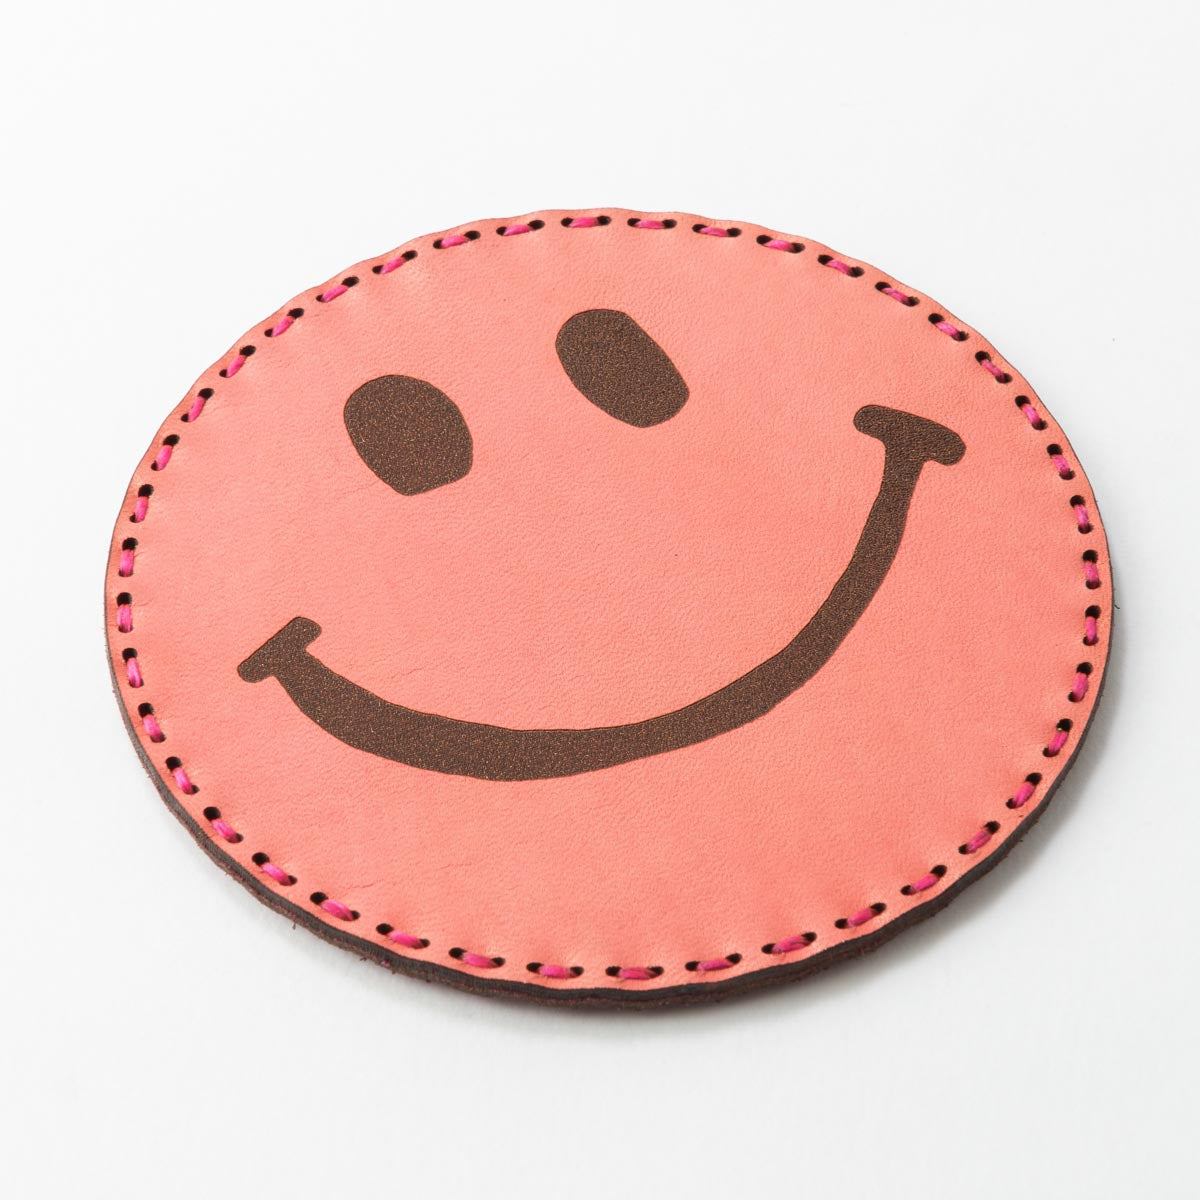 Fire-King レザーコースター SMILEY FACE レッド by OJAGA DESIGN